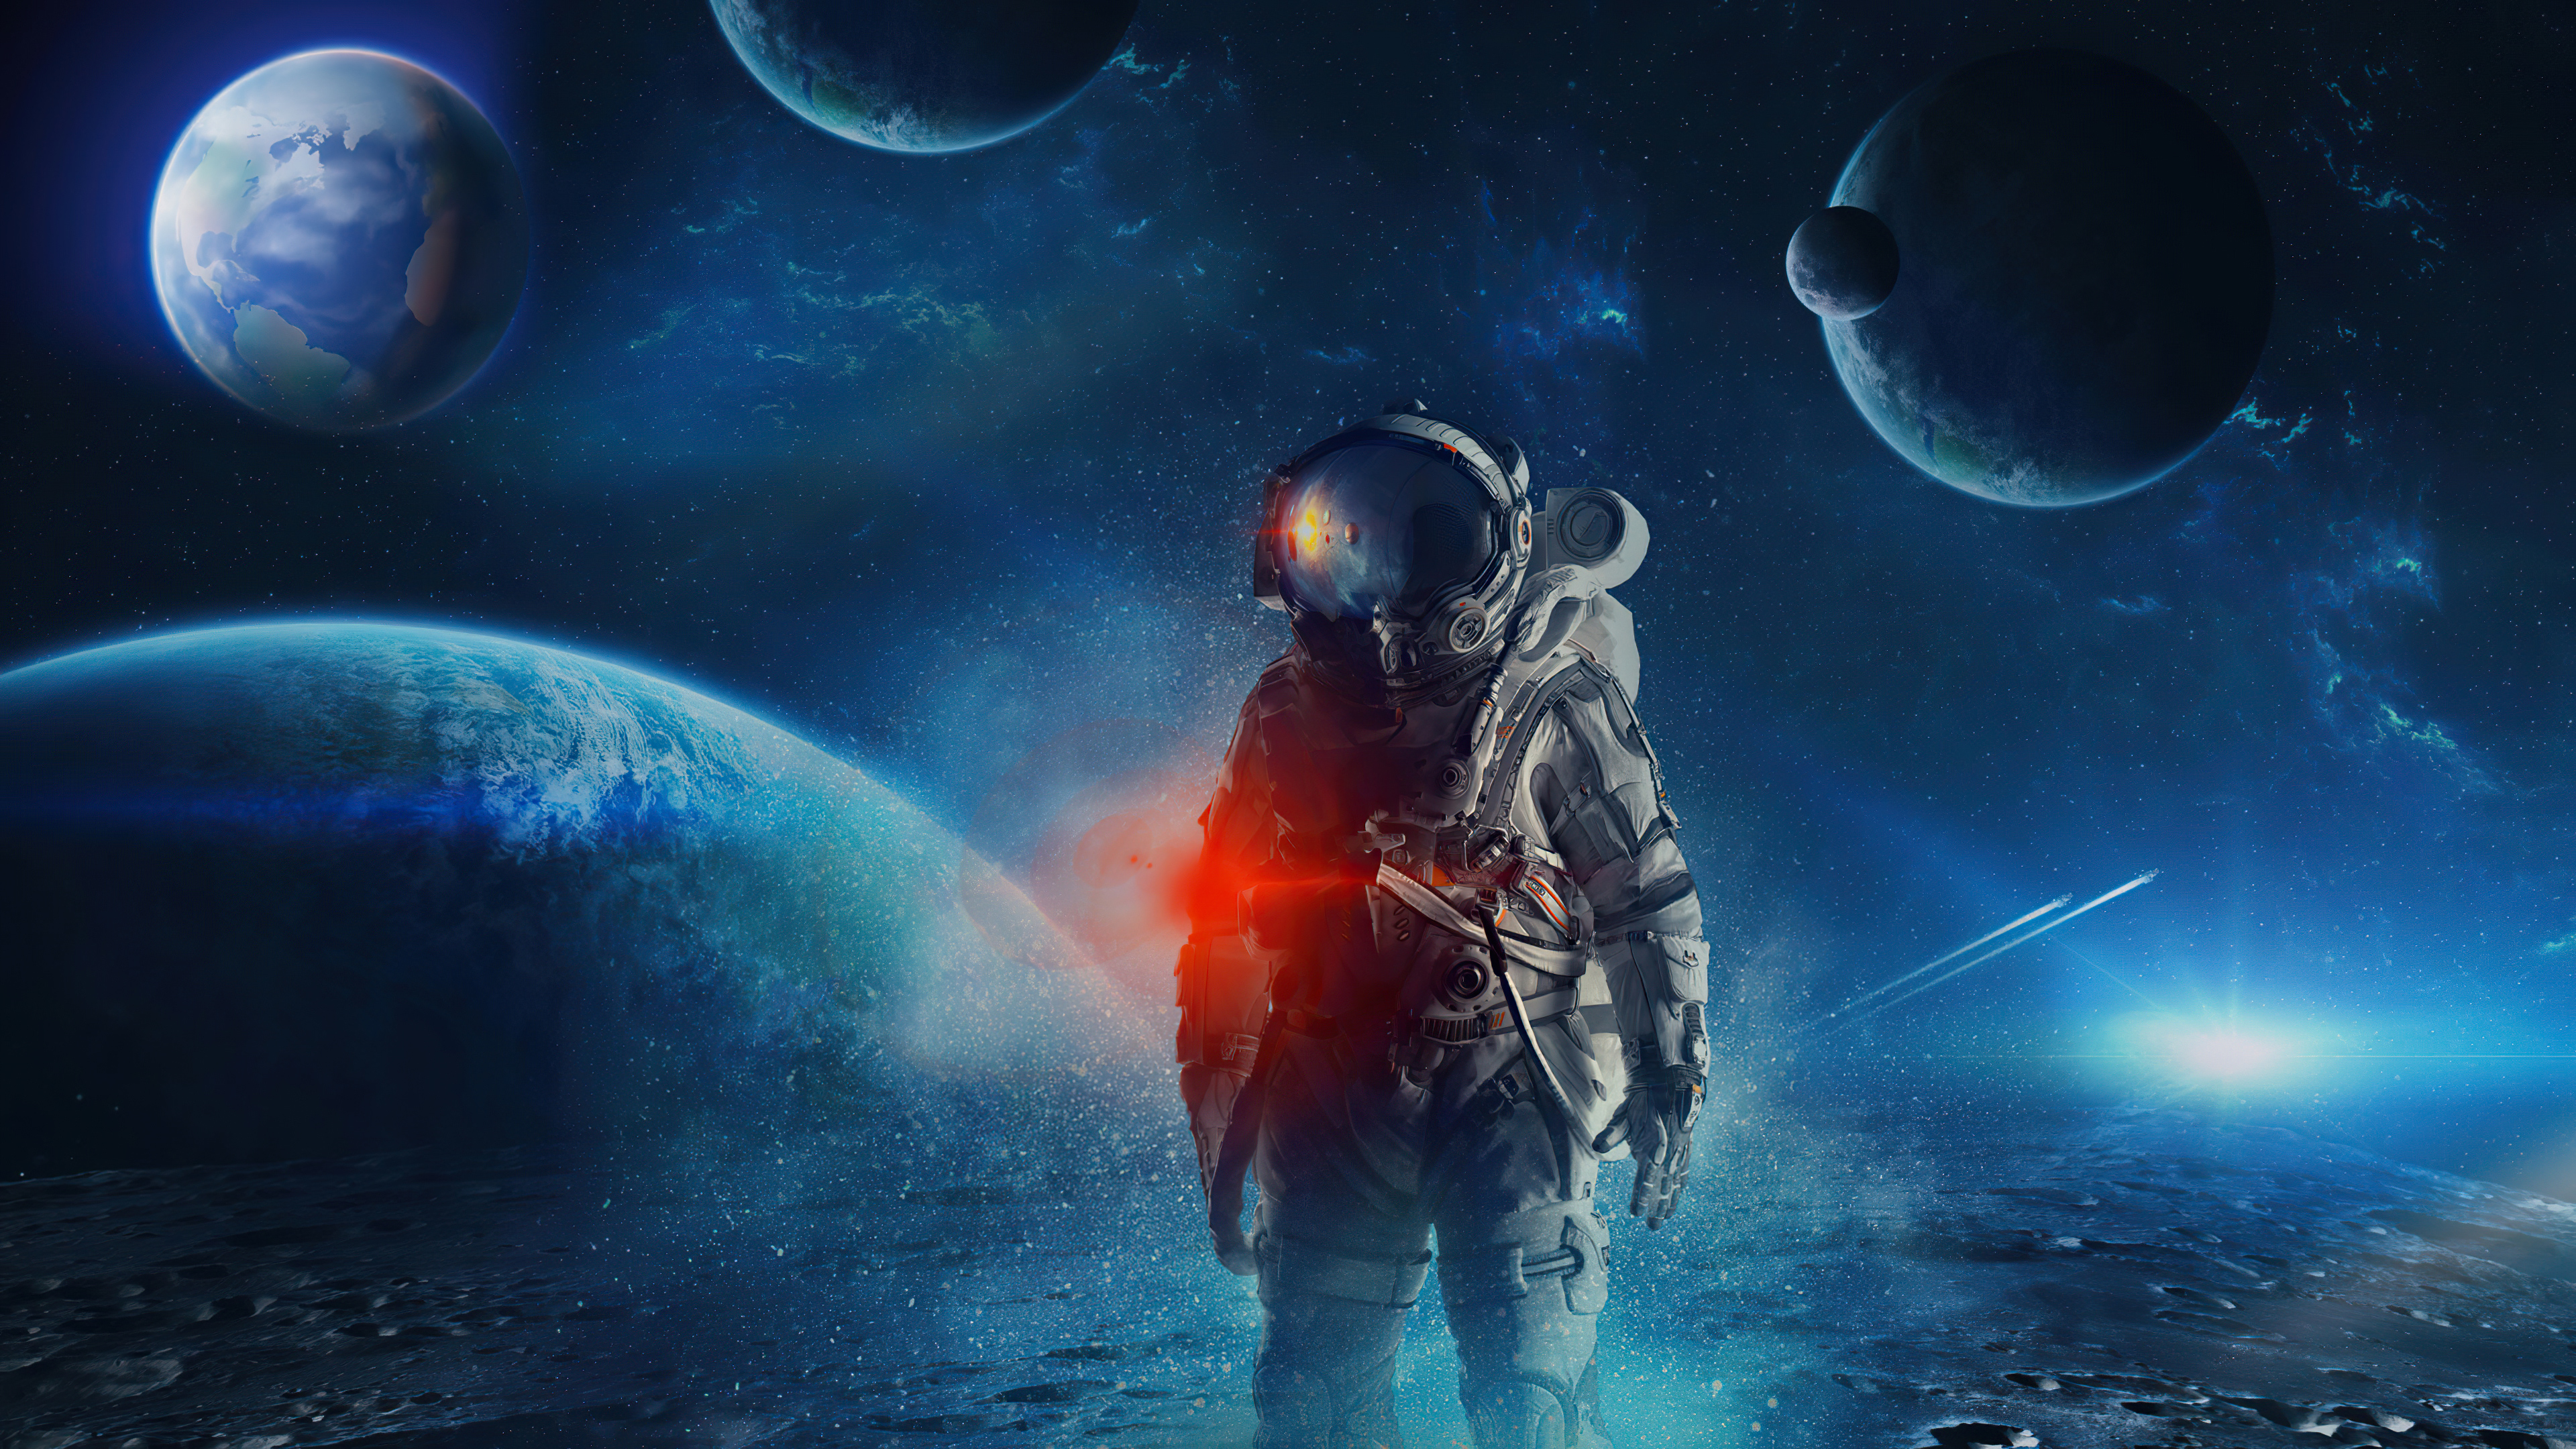 astronaut and space wallpaper